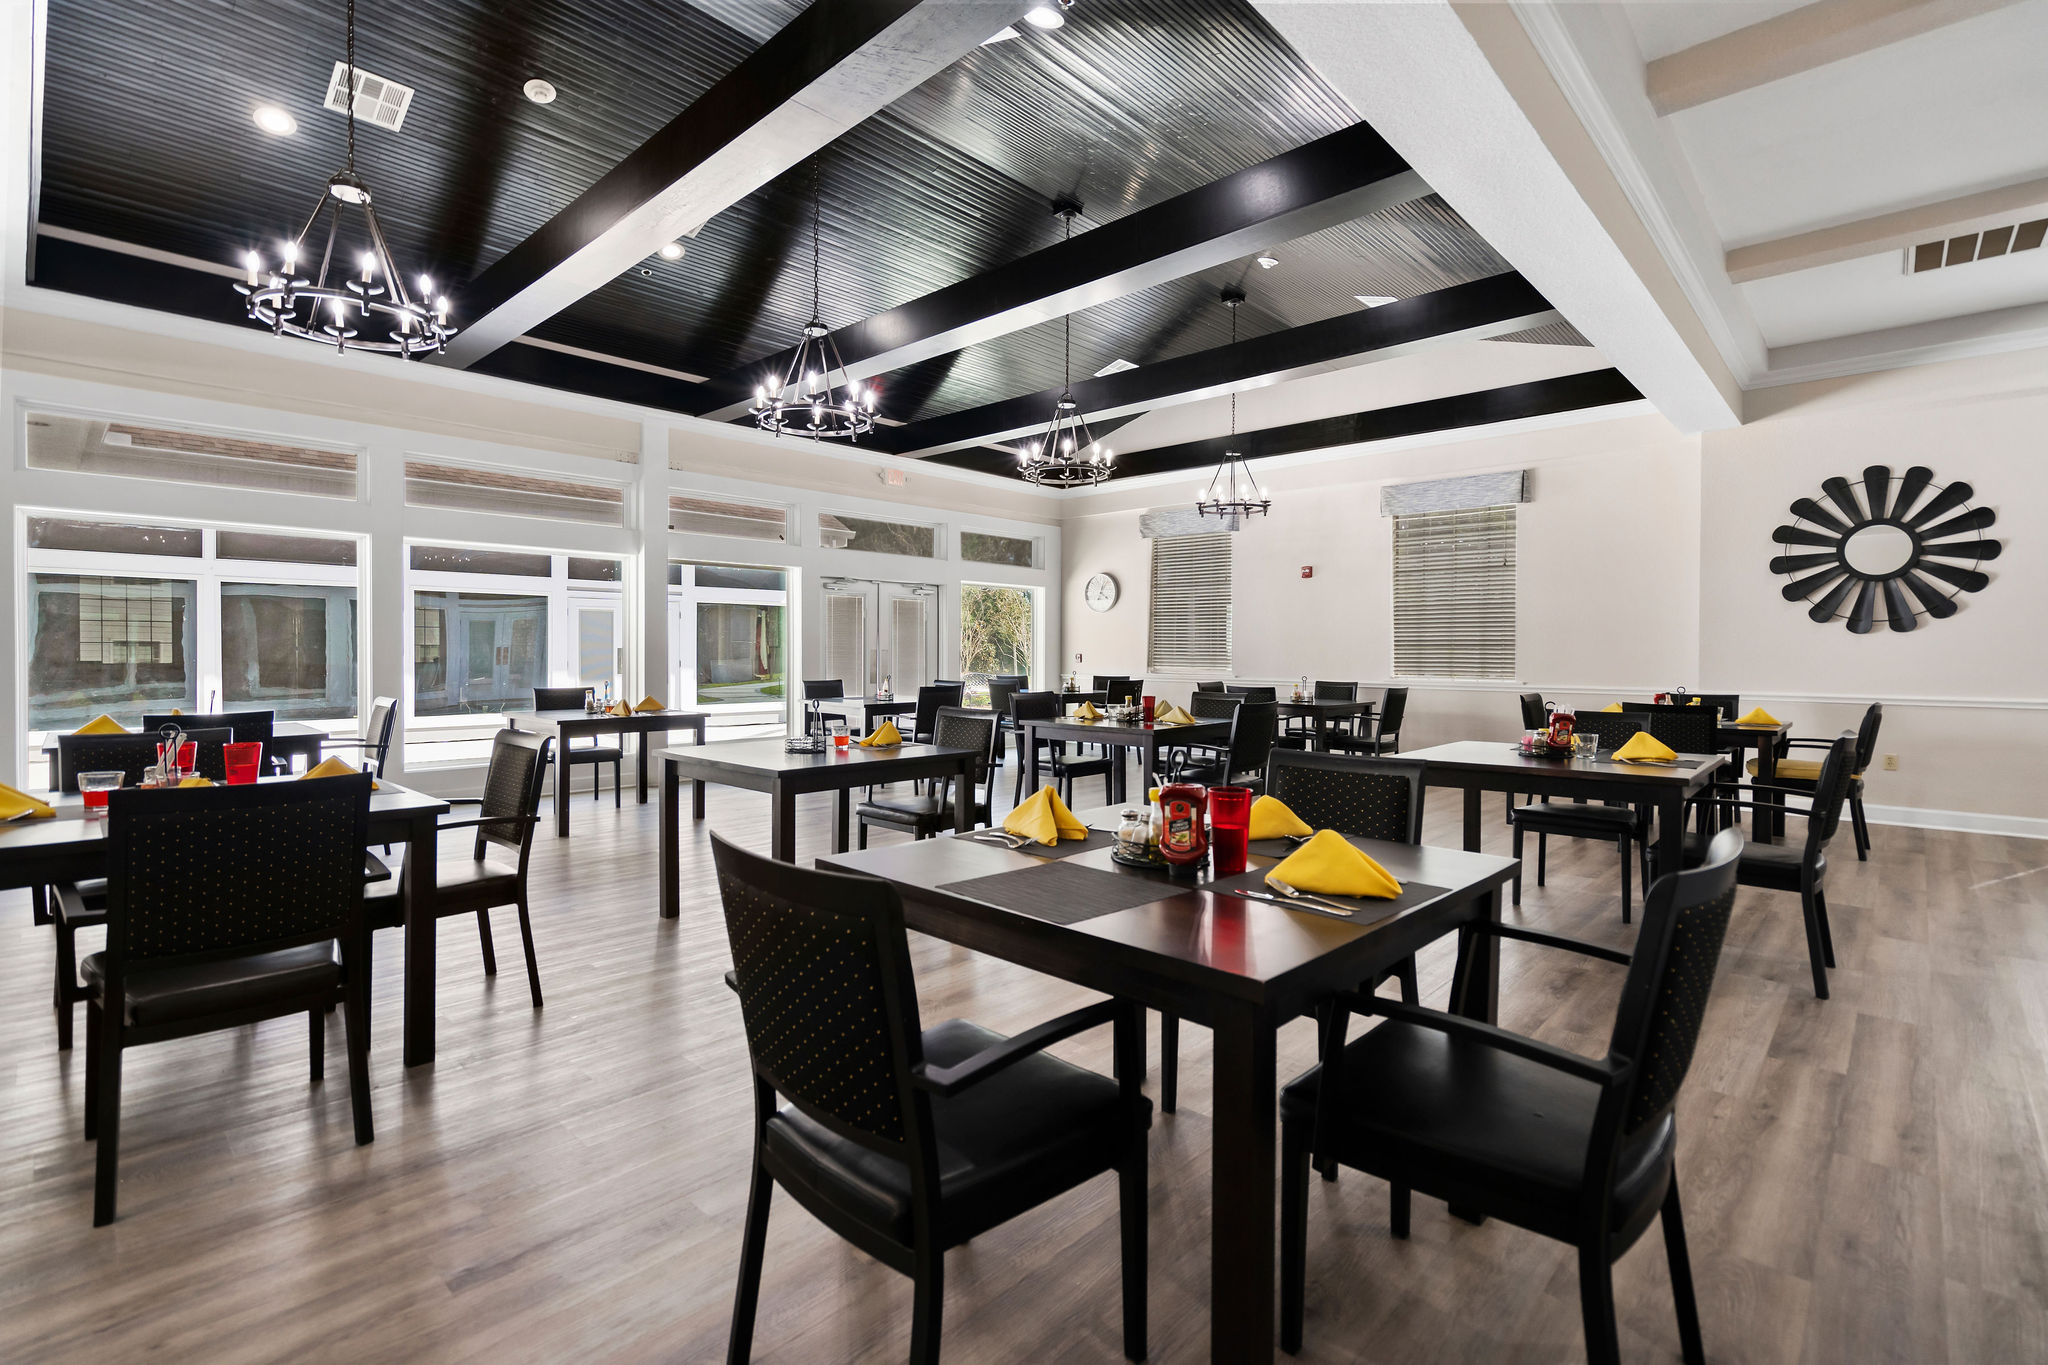 The dining area at Sundale Senior Living, where residents receive nutritious, chef-inspired meals three times daily